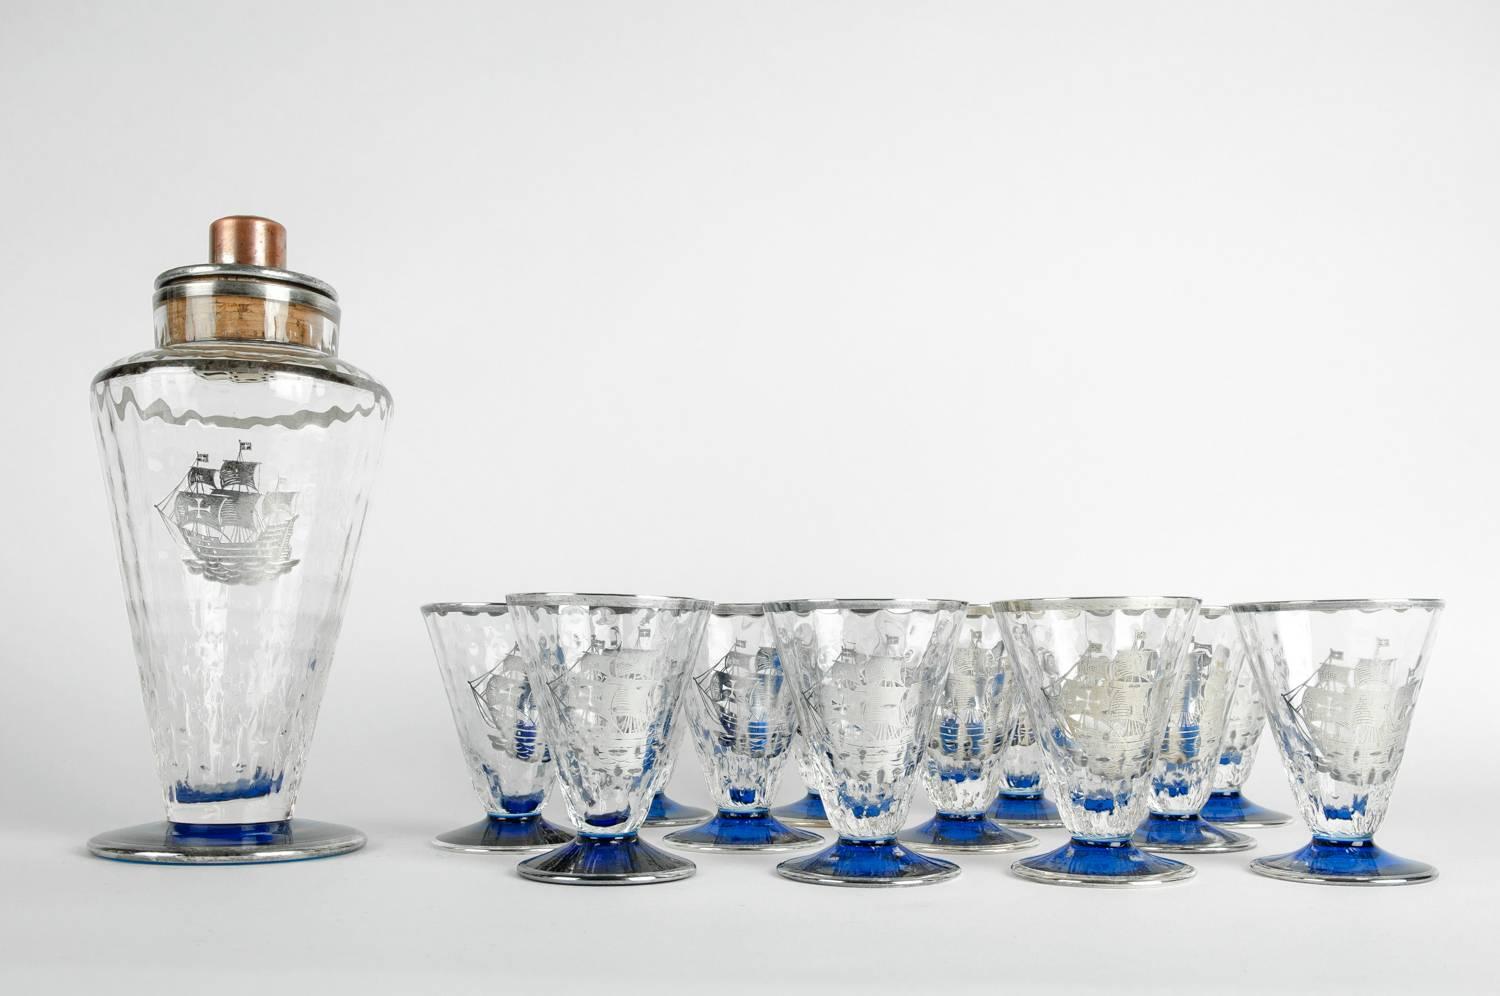 Antique Martini / Cocktail Shaker Set with Sterling Inlaid Ship Design 2